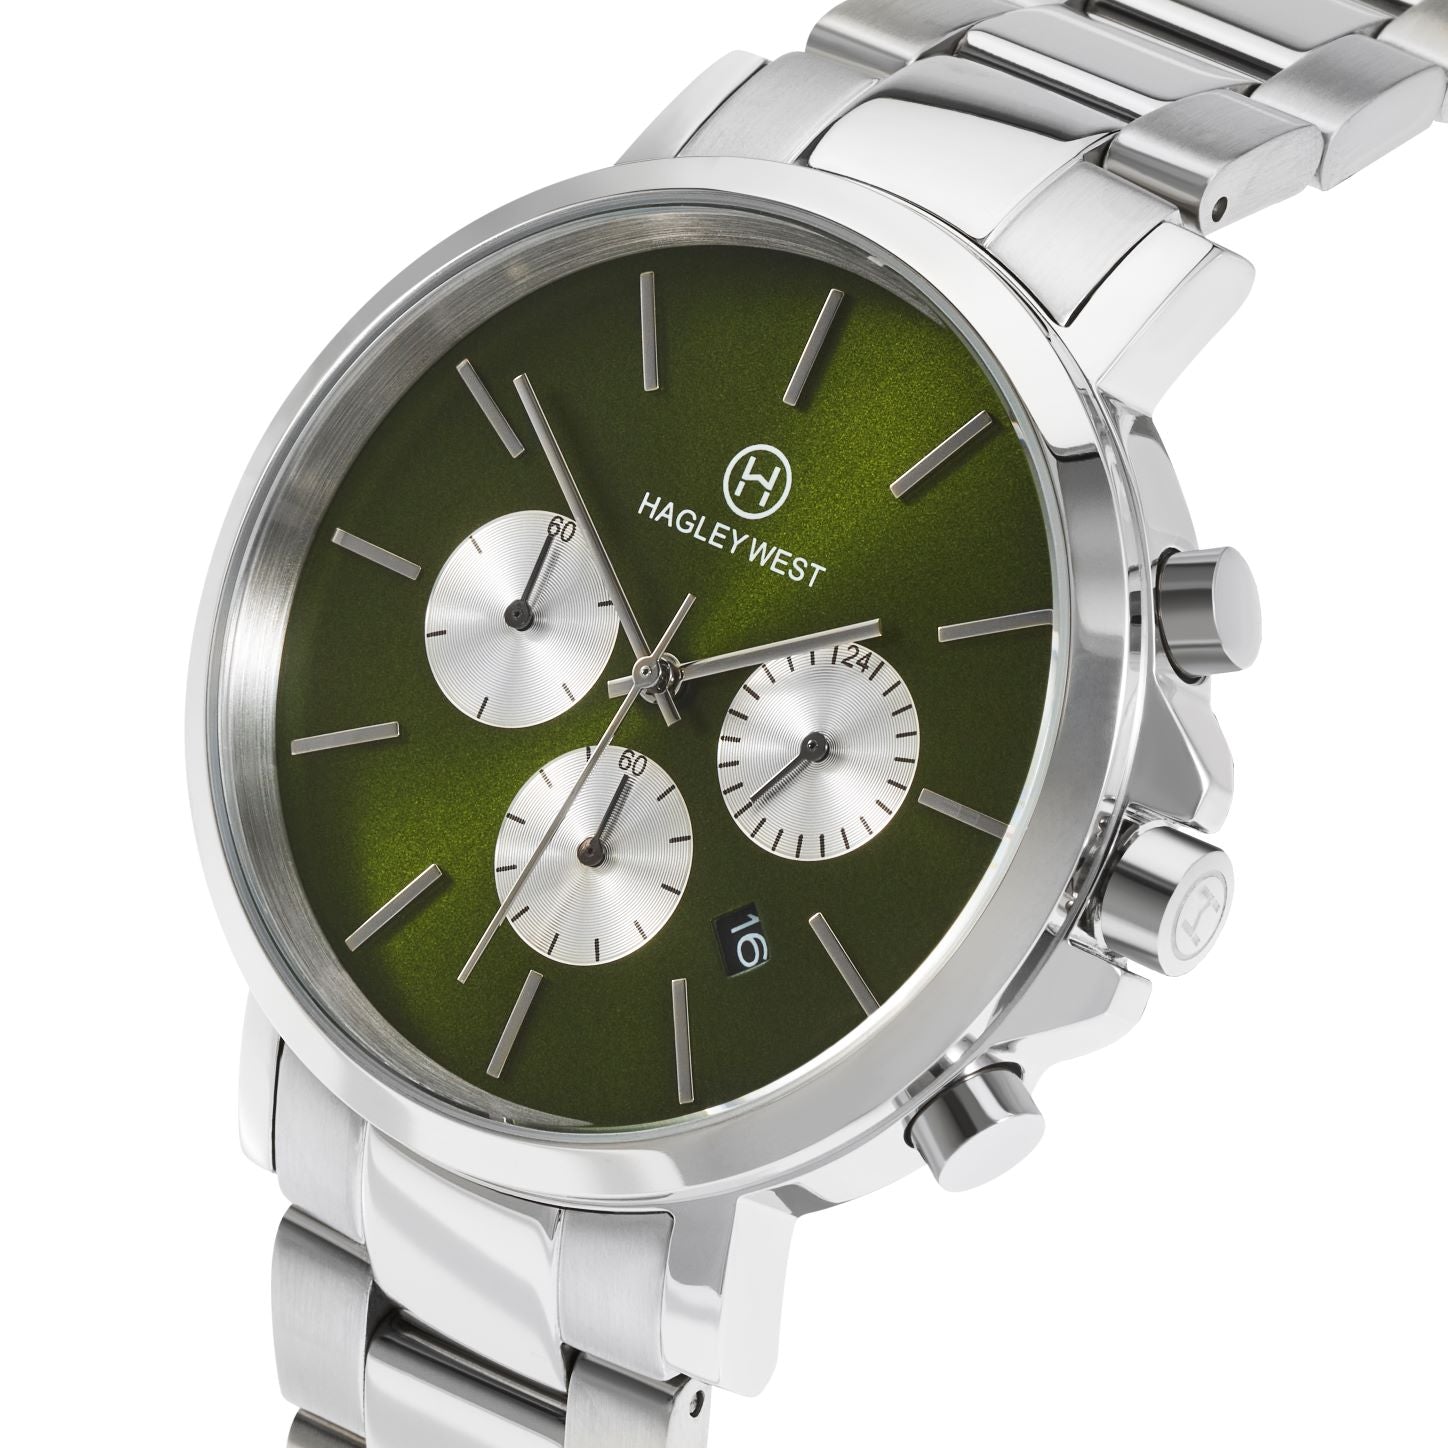 Chrono Collection | Green & Silver Watch | Men's Watches | Hagley West